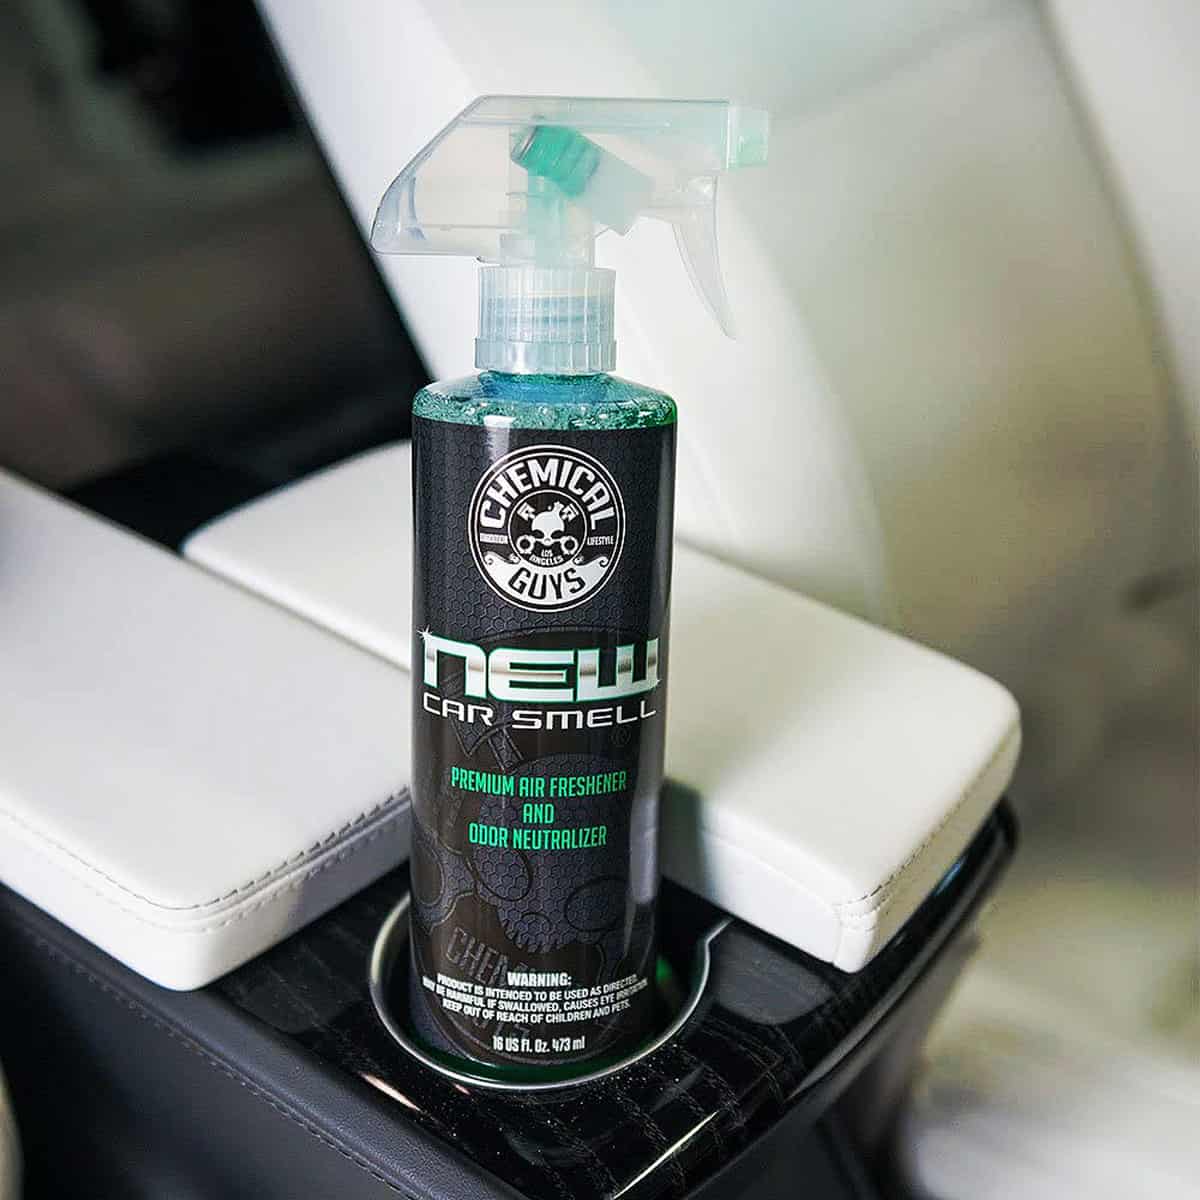 Voted Best Car Air Freshener: Chemical Guys New Car Scent – The